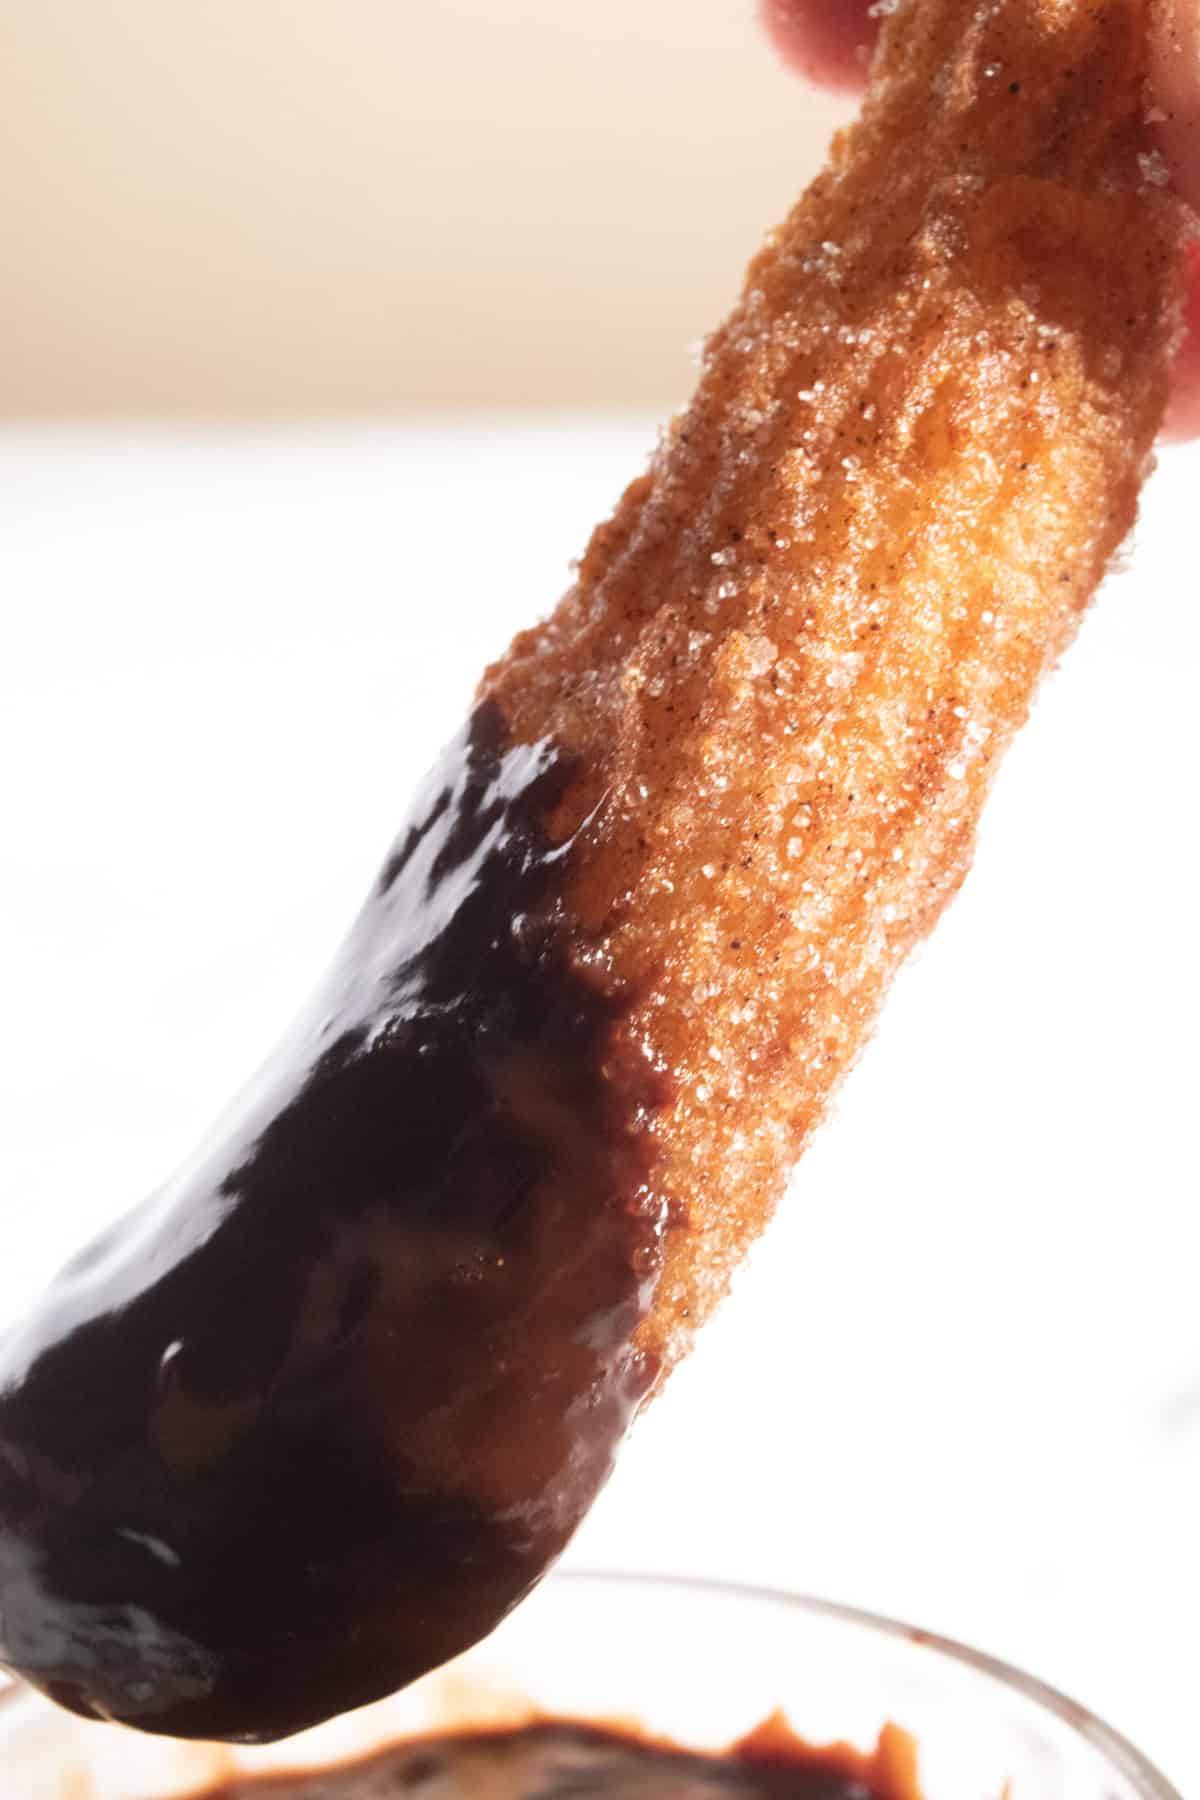 A large churro just after being dipped into vegan chocolate.